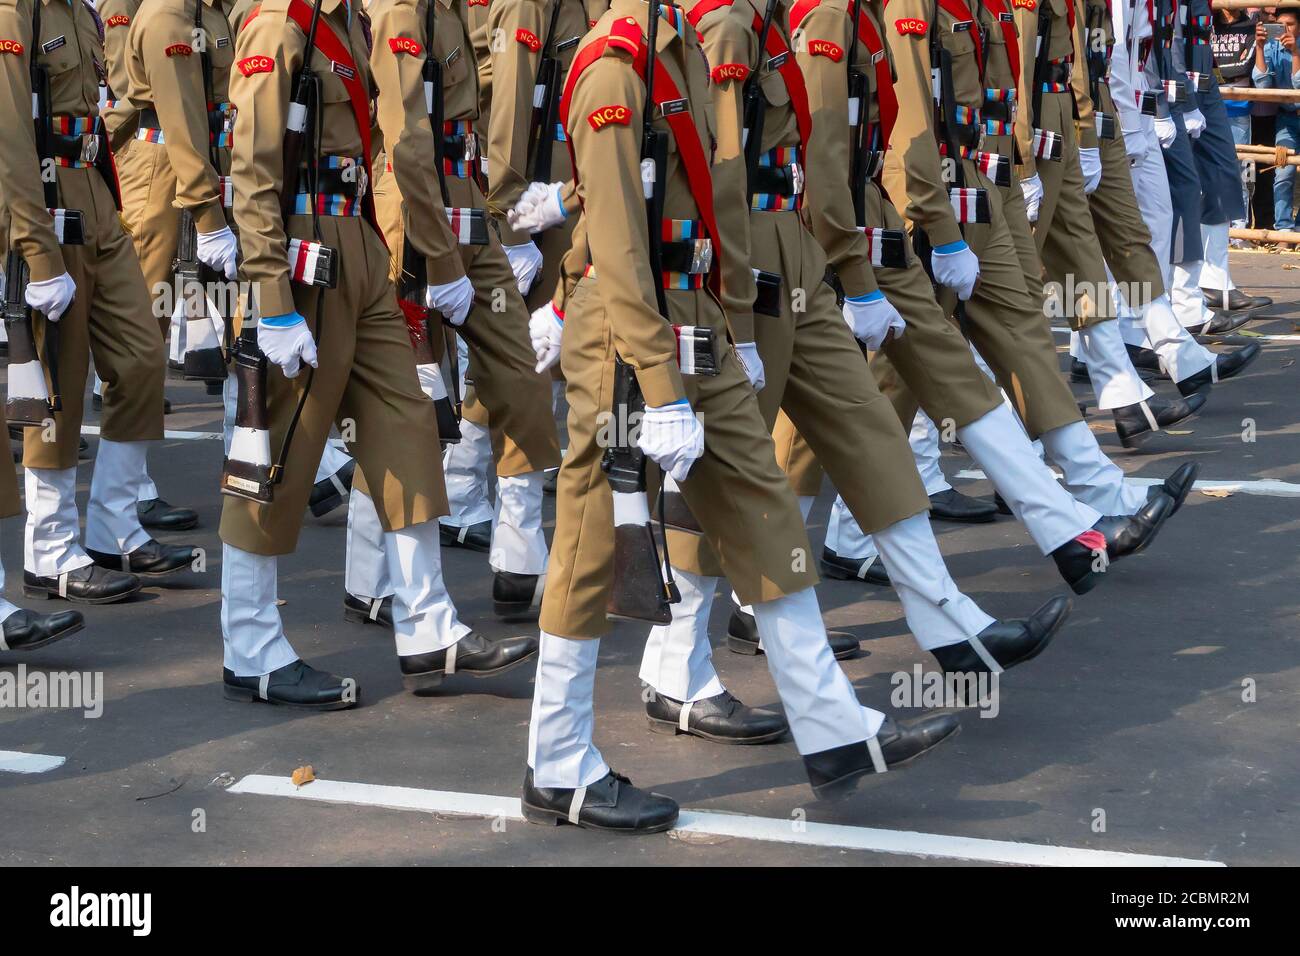 Kolkata, West Bengal, India - 26th January 2020 : India's National Cadet Corps's (NCC) cadets are marching past in rhythm, in khaki dresses, red hat. Stock Photo